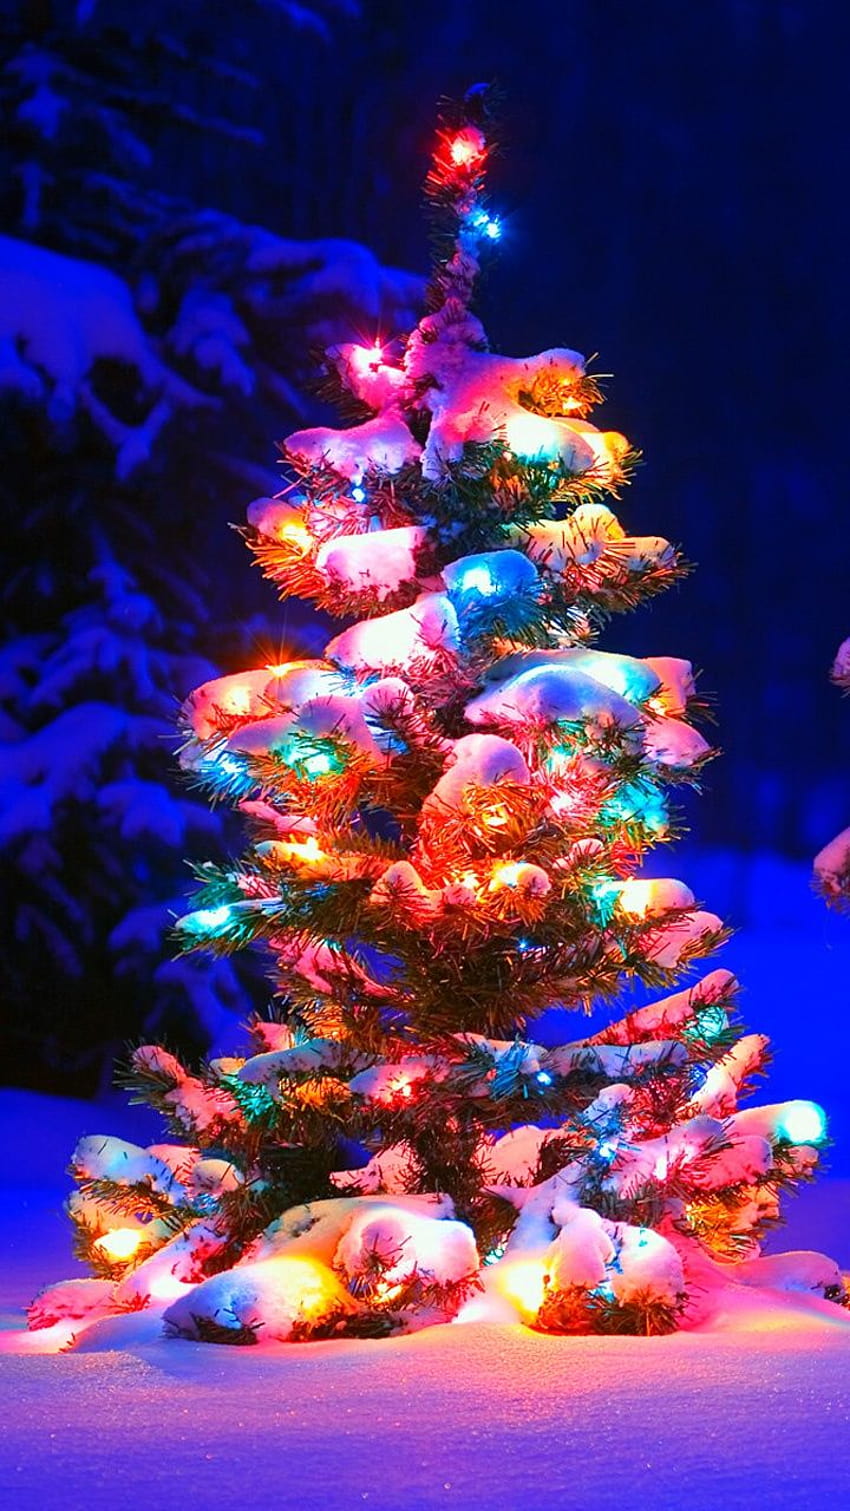 Snowy Christmas Tree Lights in jpg format for, christmas tree and lights HD phone wallpaper